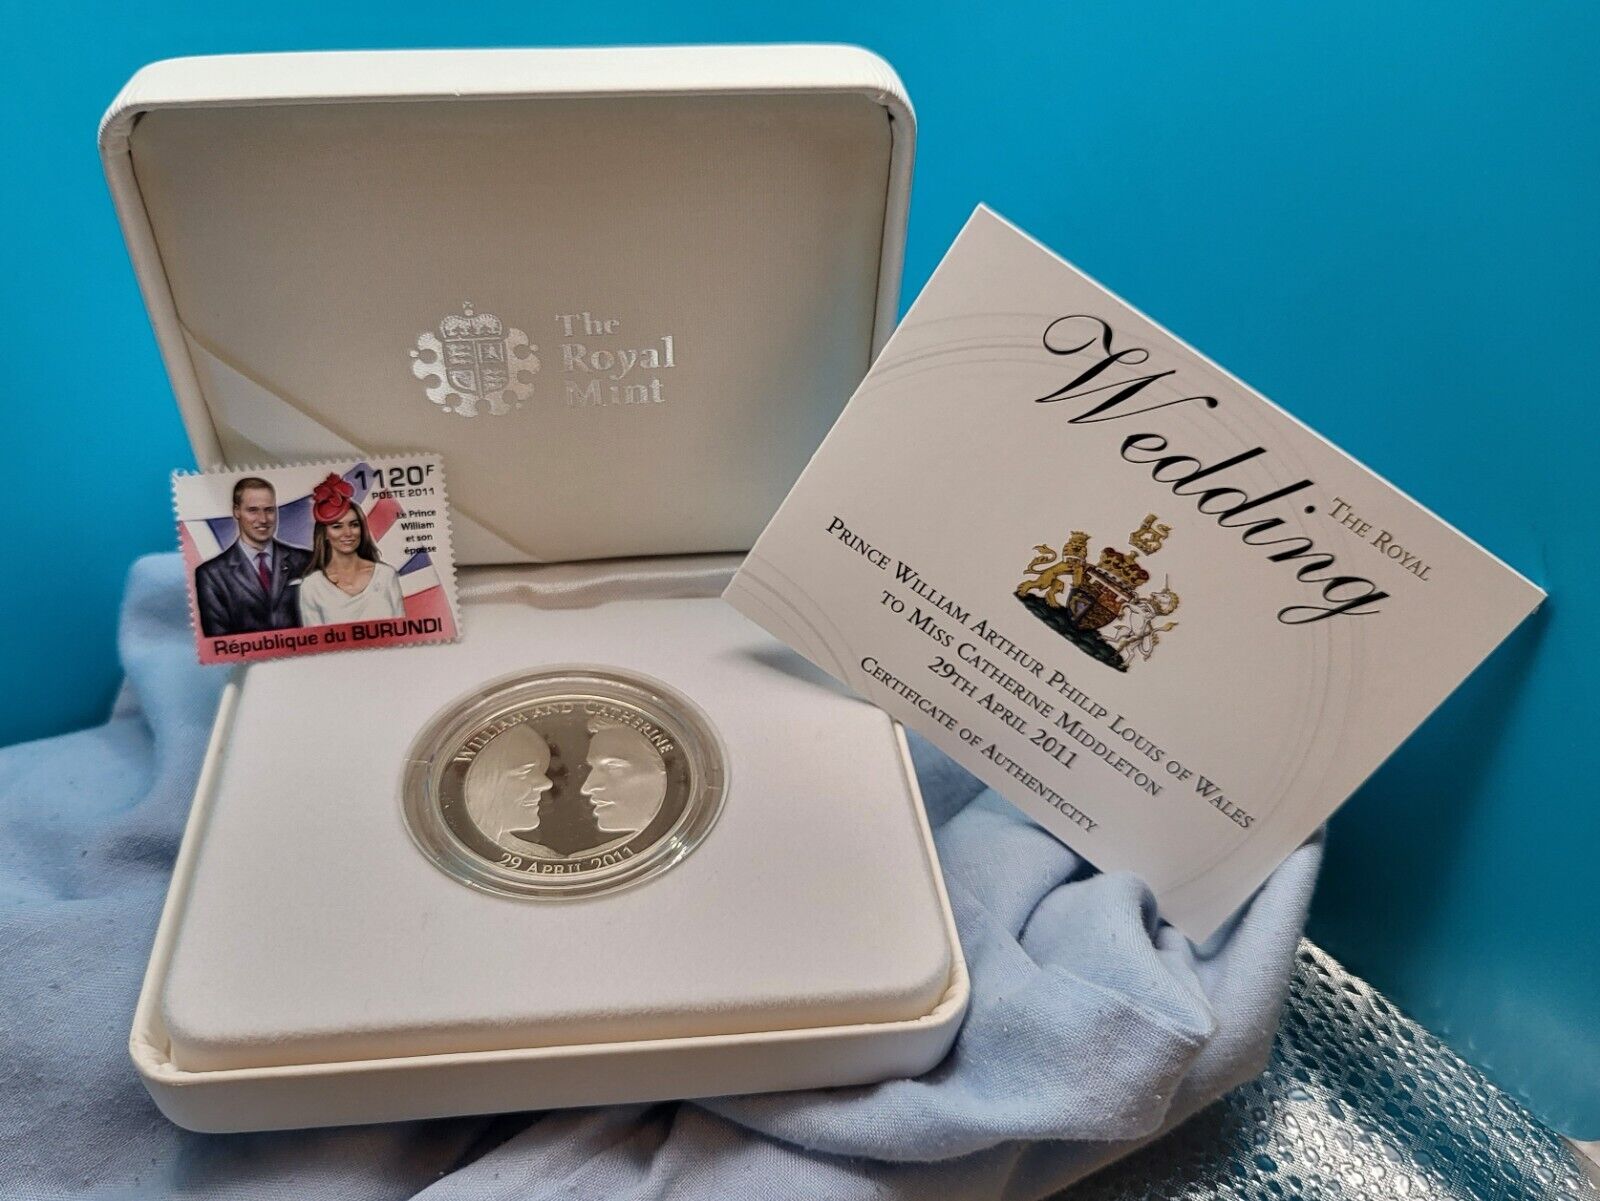 Kate Middleton Prince William Wedding Solid Silver Sterling Coin Proof Signed UK